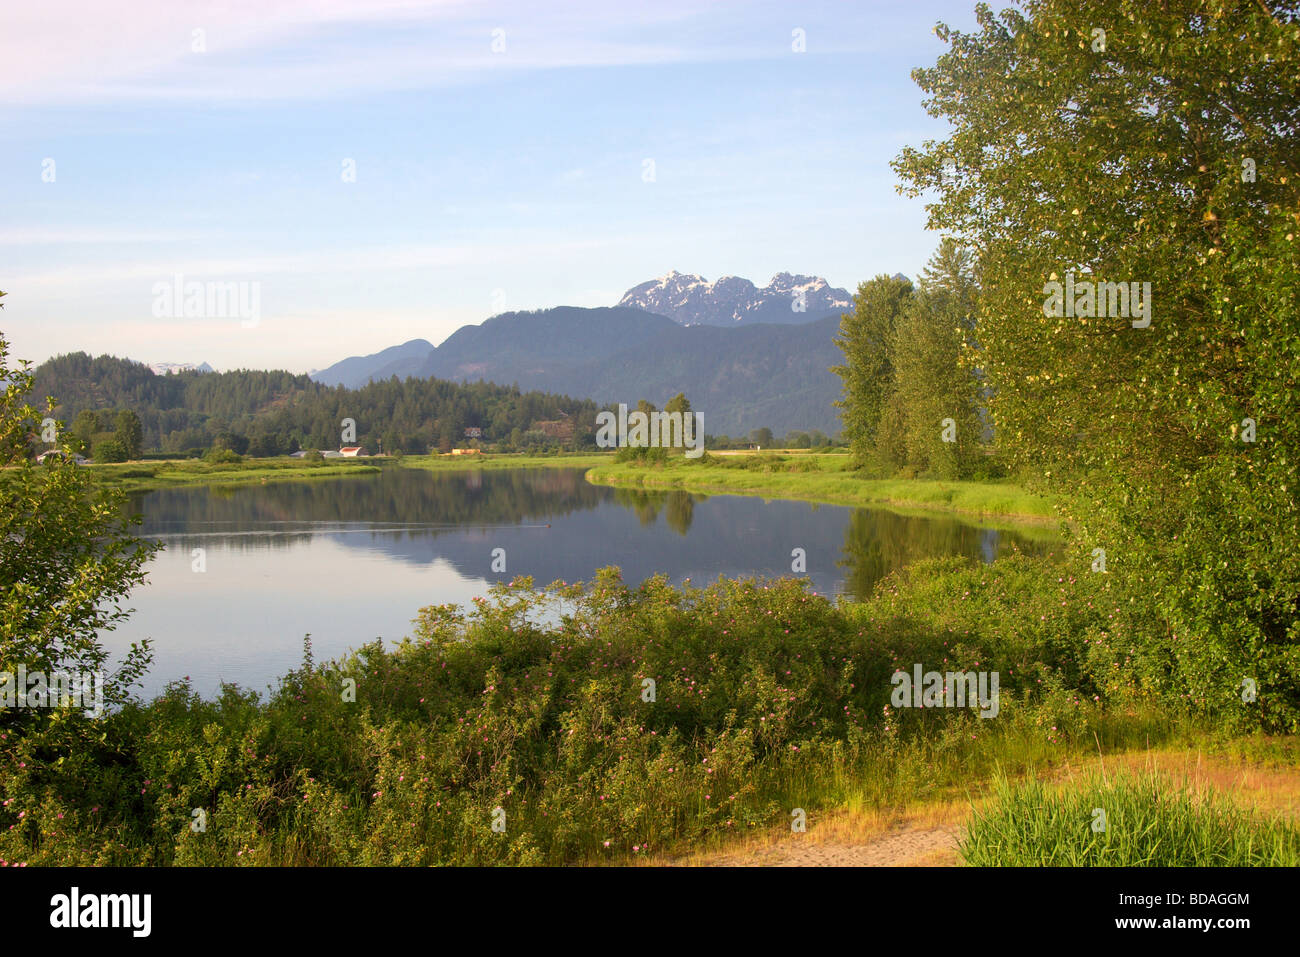 View of Allouette River in Pitt Meadows with the Golden Ears in the background Stock Photo